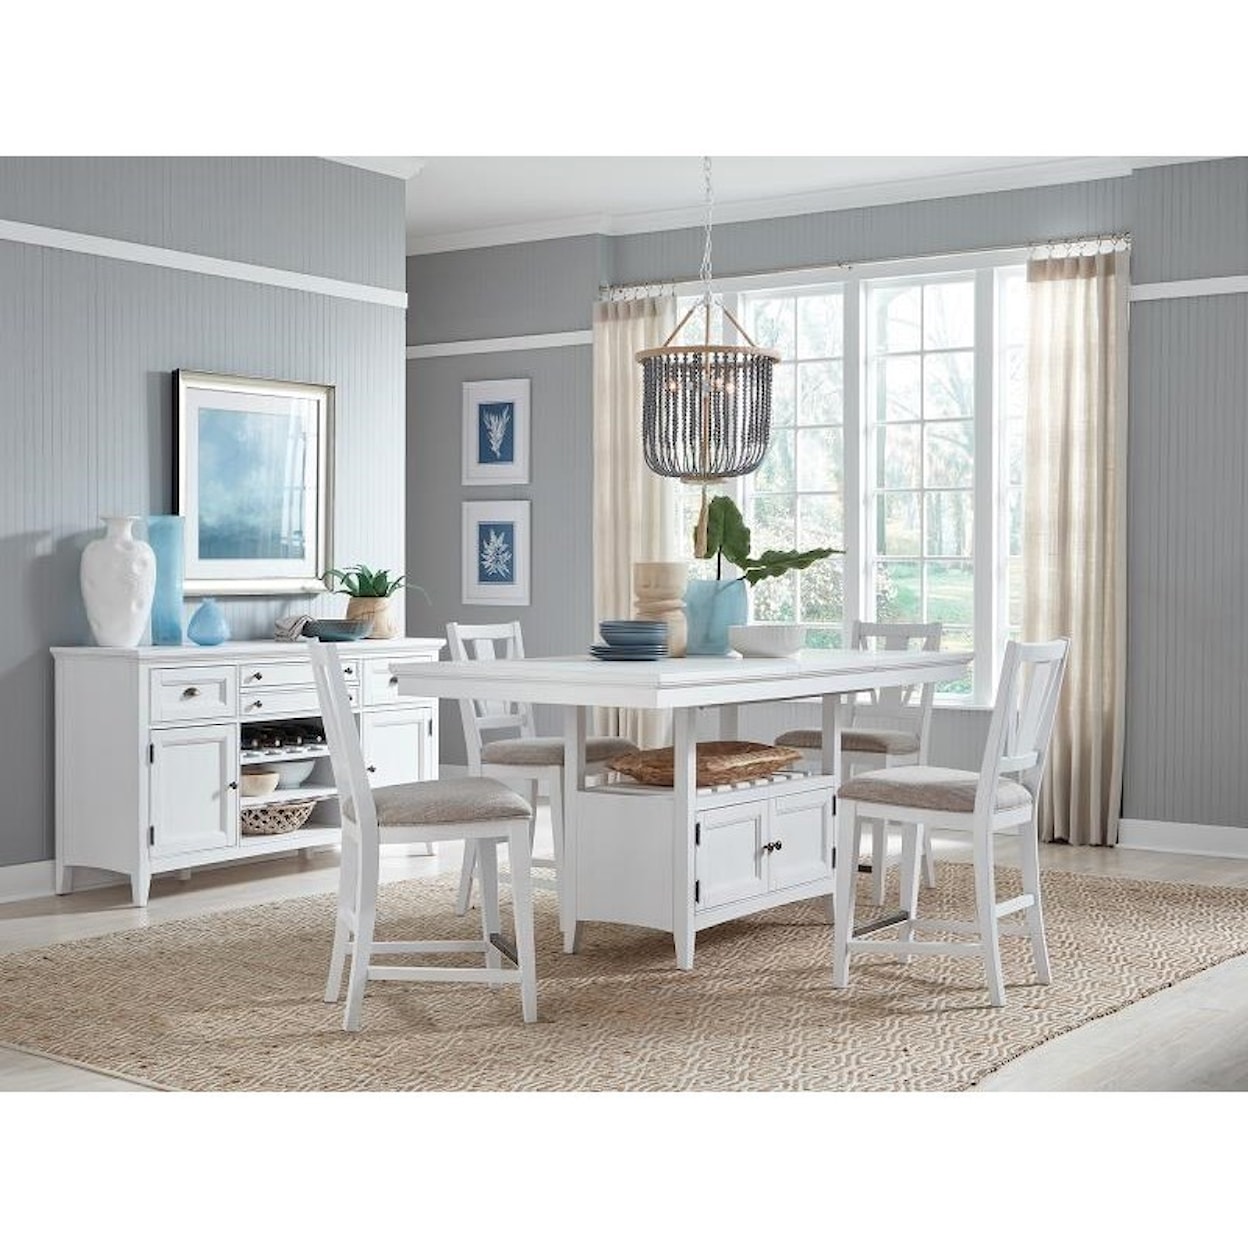 Magnussen Home Heron Cove Dining 5-Piece Counter Height Dining Set